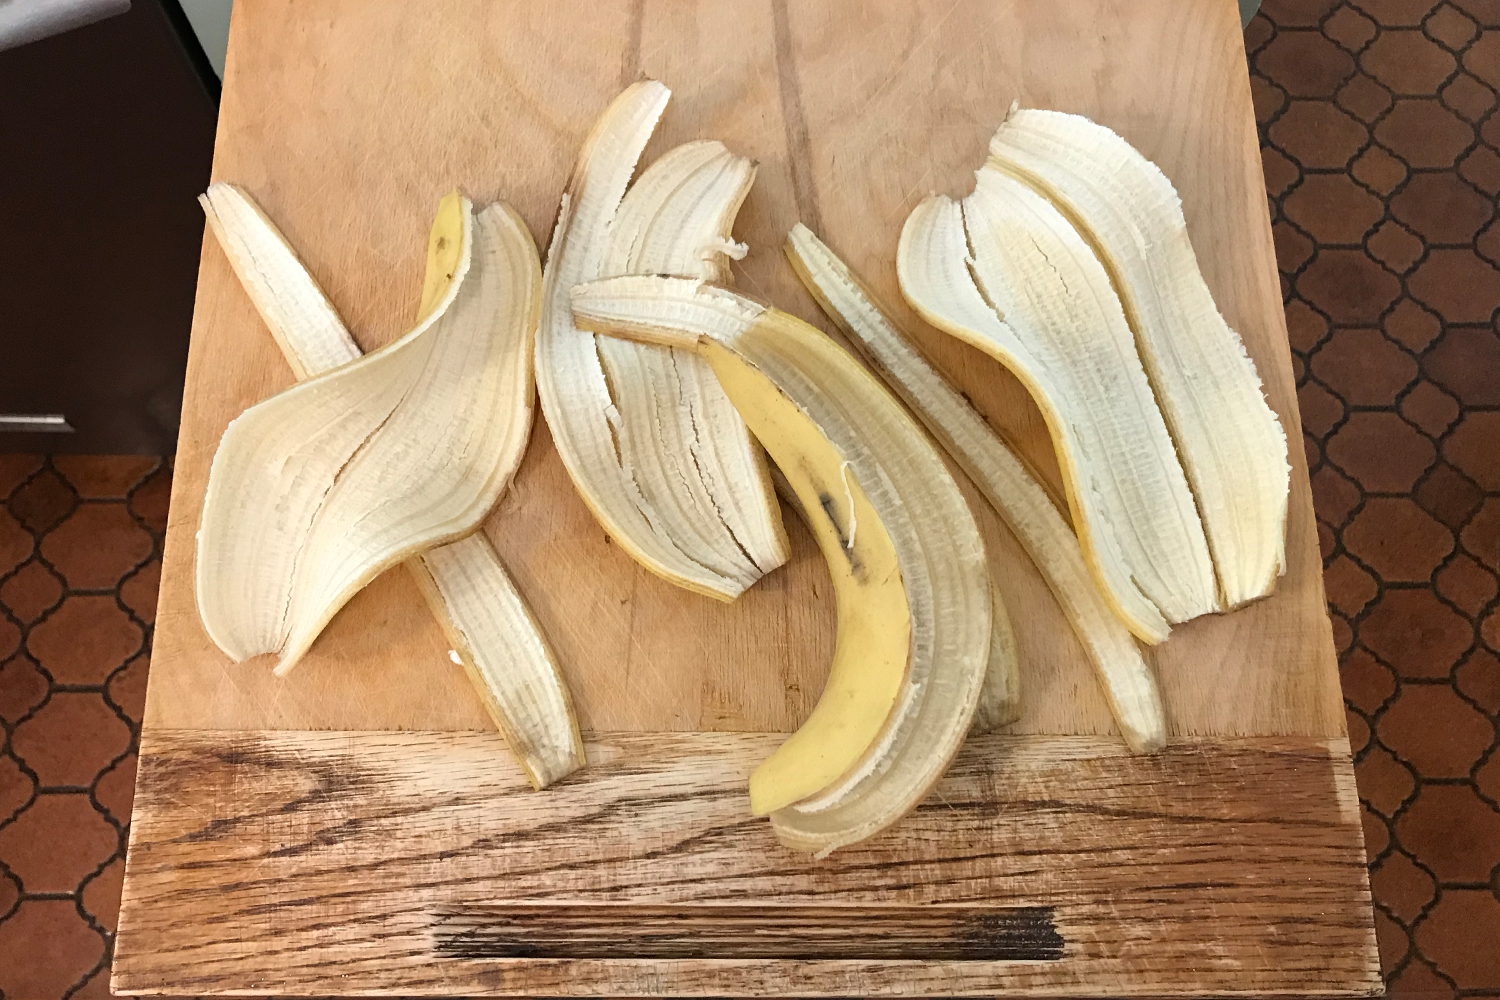 Banana peels without the fruit inside. This is the first step in a recipe for banana peel bacon, a polarizing fake meat dish.